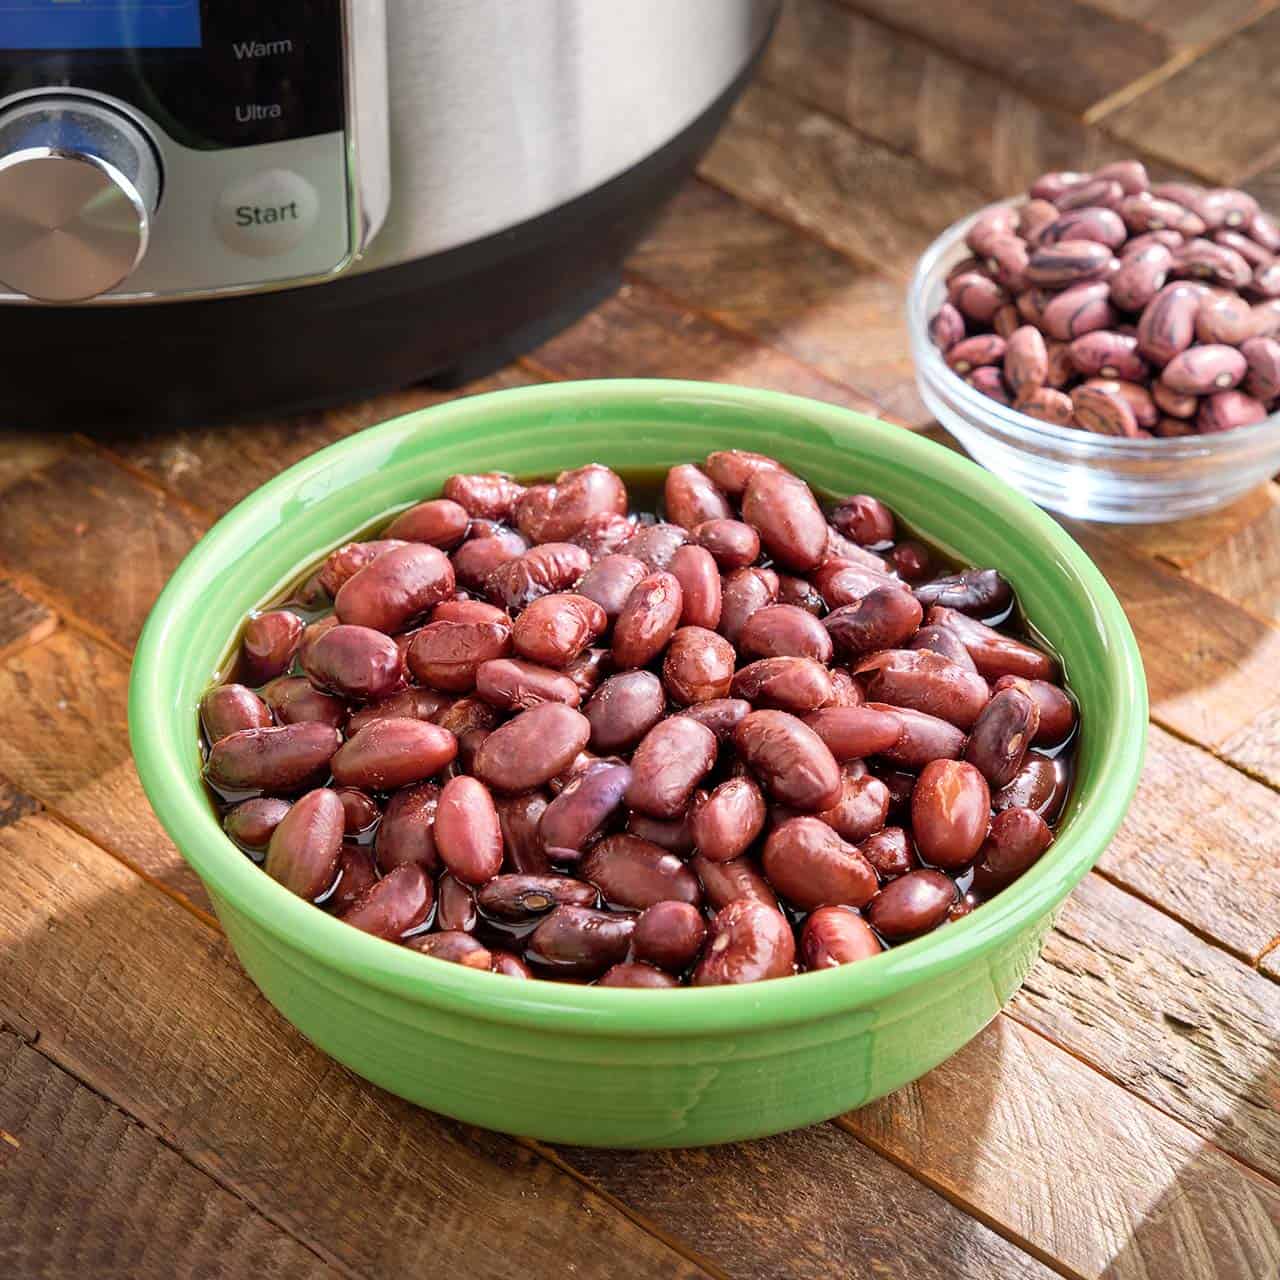 A bowl of cooked Rio Zape beans on a wood table, with a dish of uncooked beans and an Instant Pot in the background